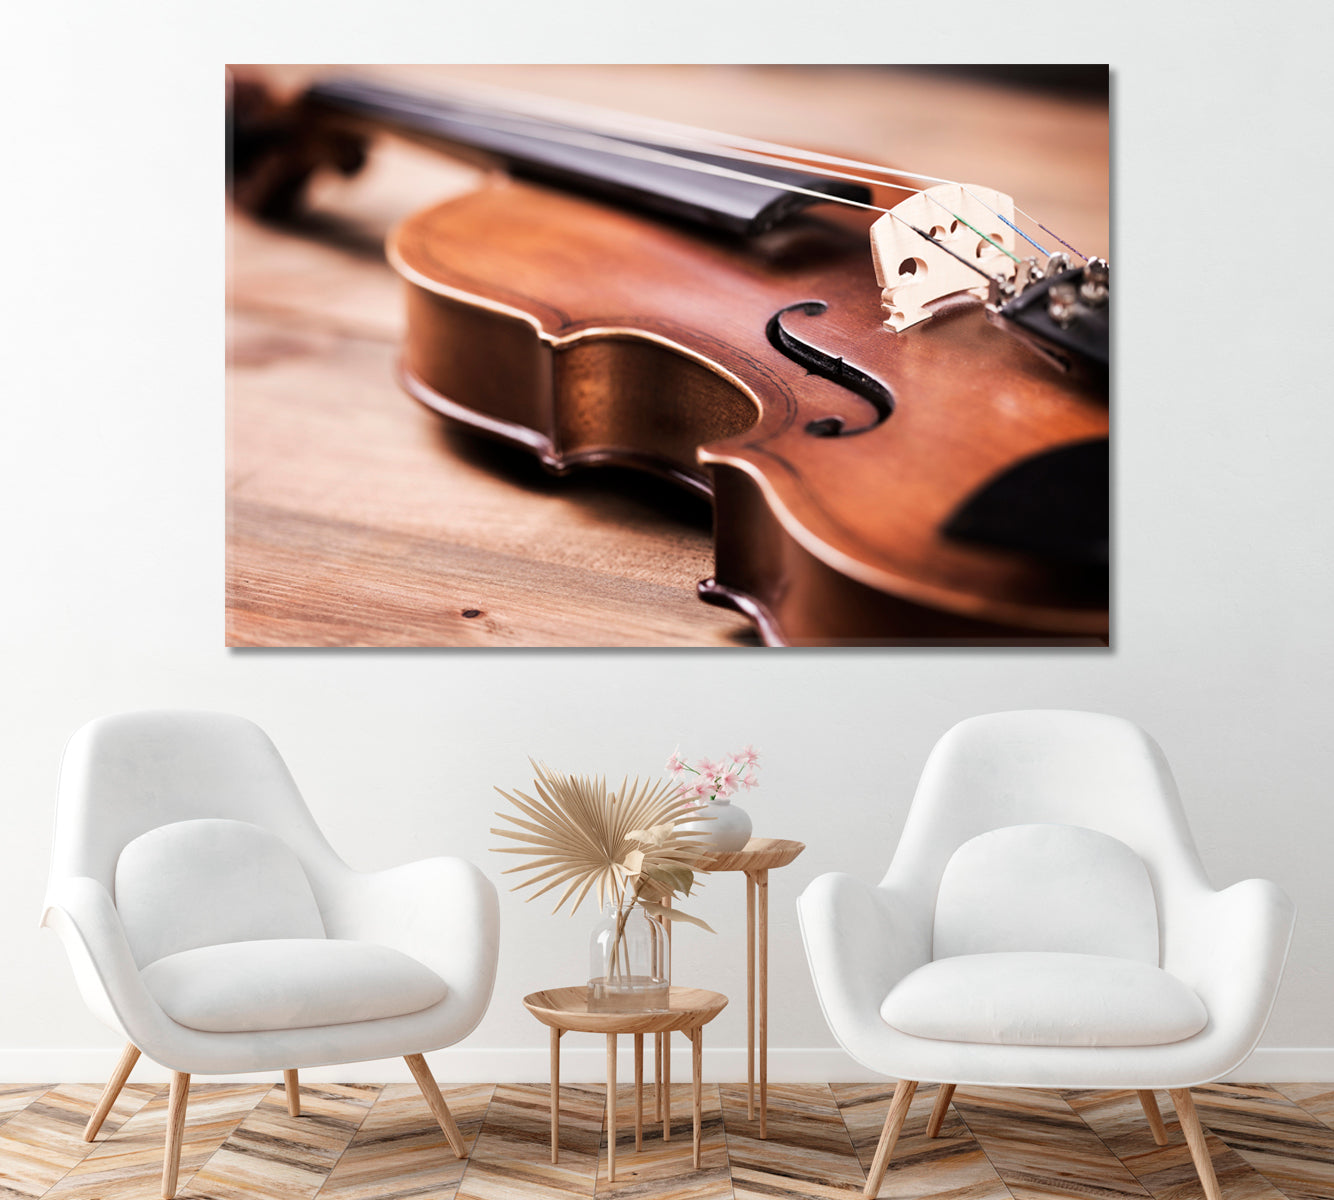 Violin Strings Canvas Print ArtLexy 1 Panel 24"x16" inches 